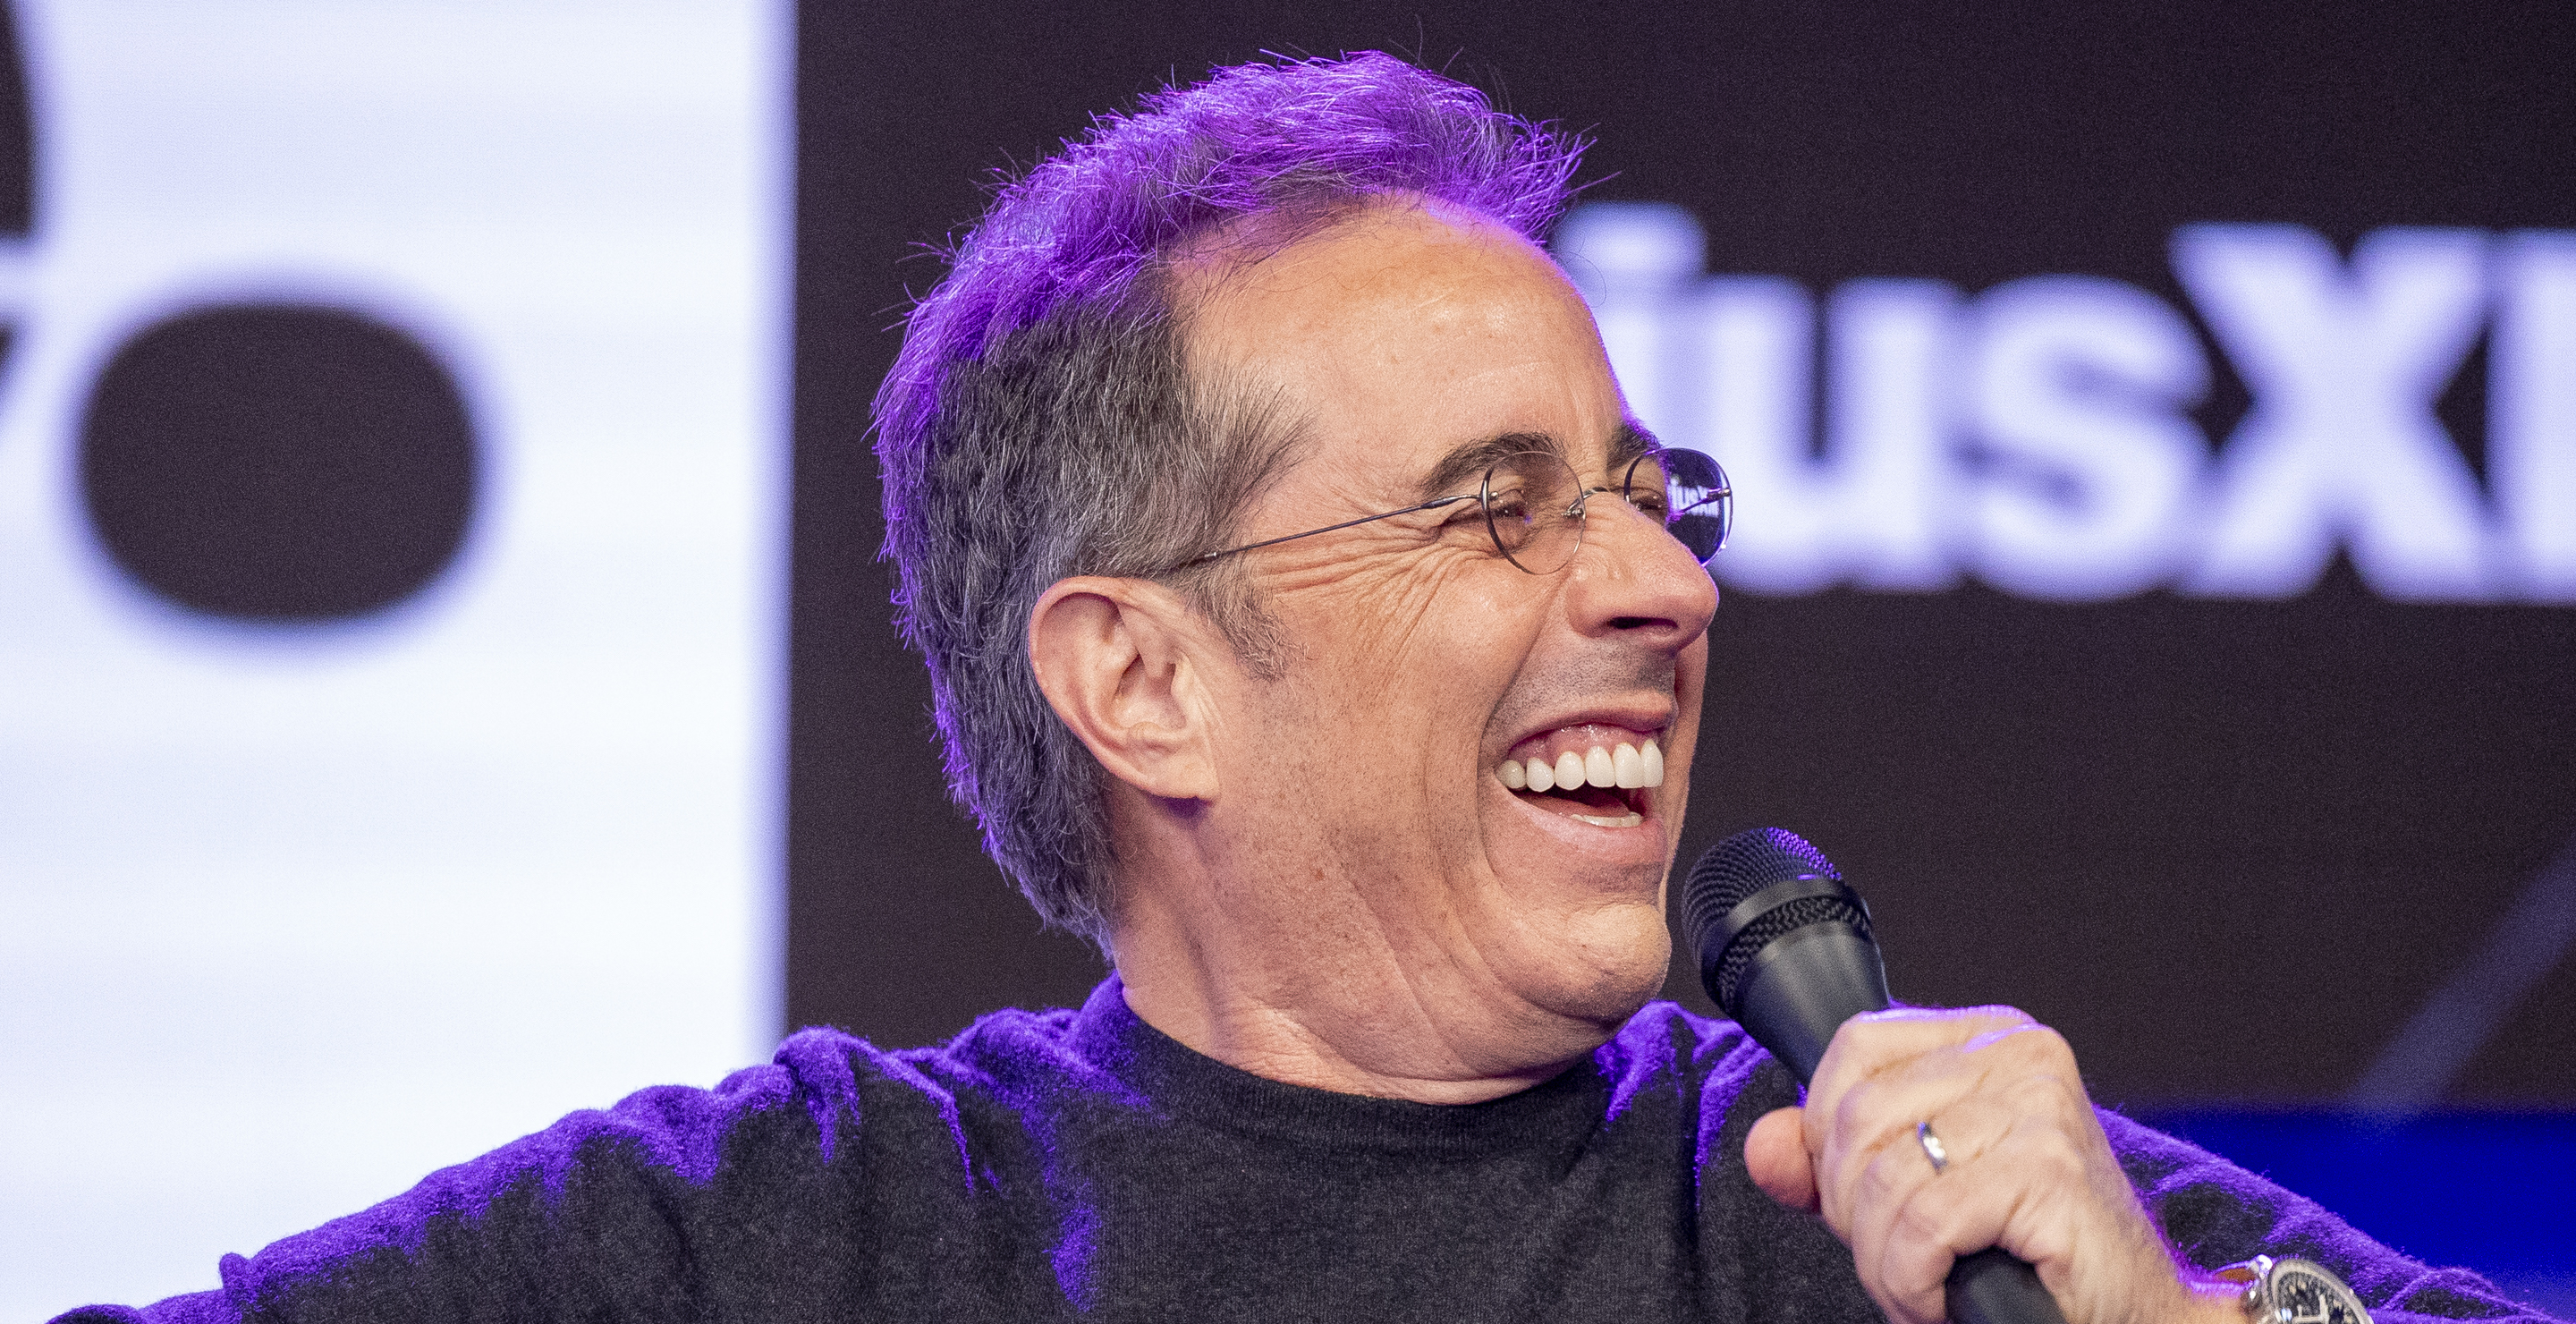 jerry-seinfeld-calling-for-a-comeback-in-dominant-masculinity